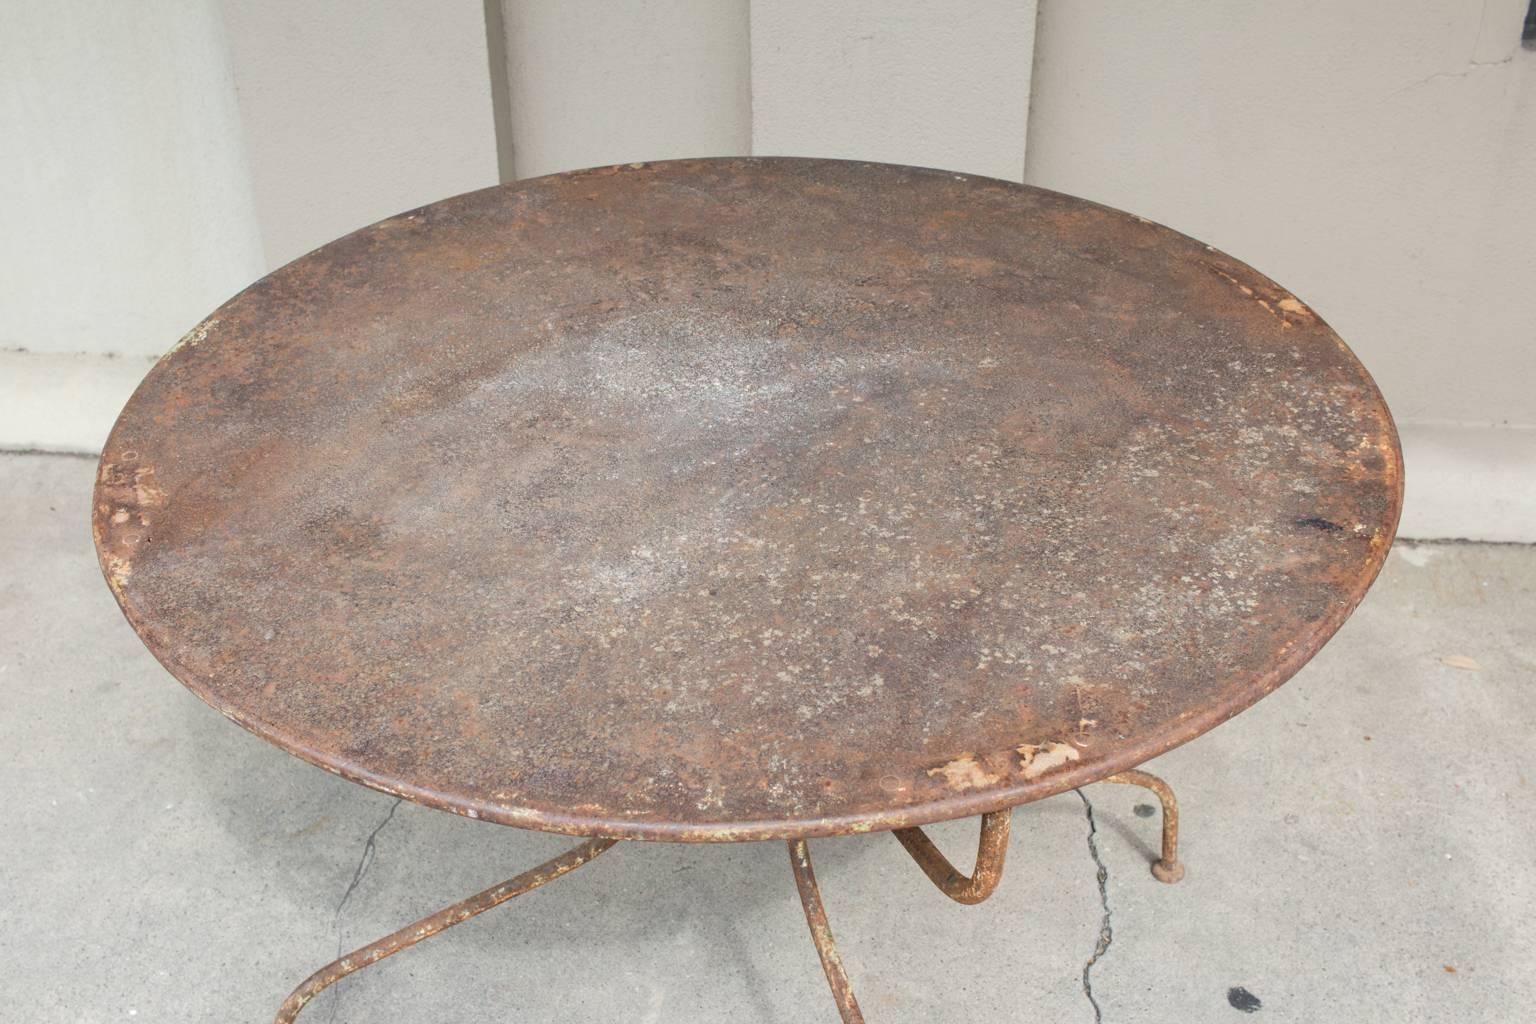 Add rustic charm to any space, indoors or out with this round, metal garden table. Sourced during our most recent trip to France, this table dates to the 1920s and features a rusted finish. See images for full details.

Measures: 44